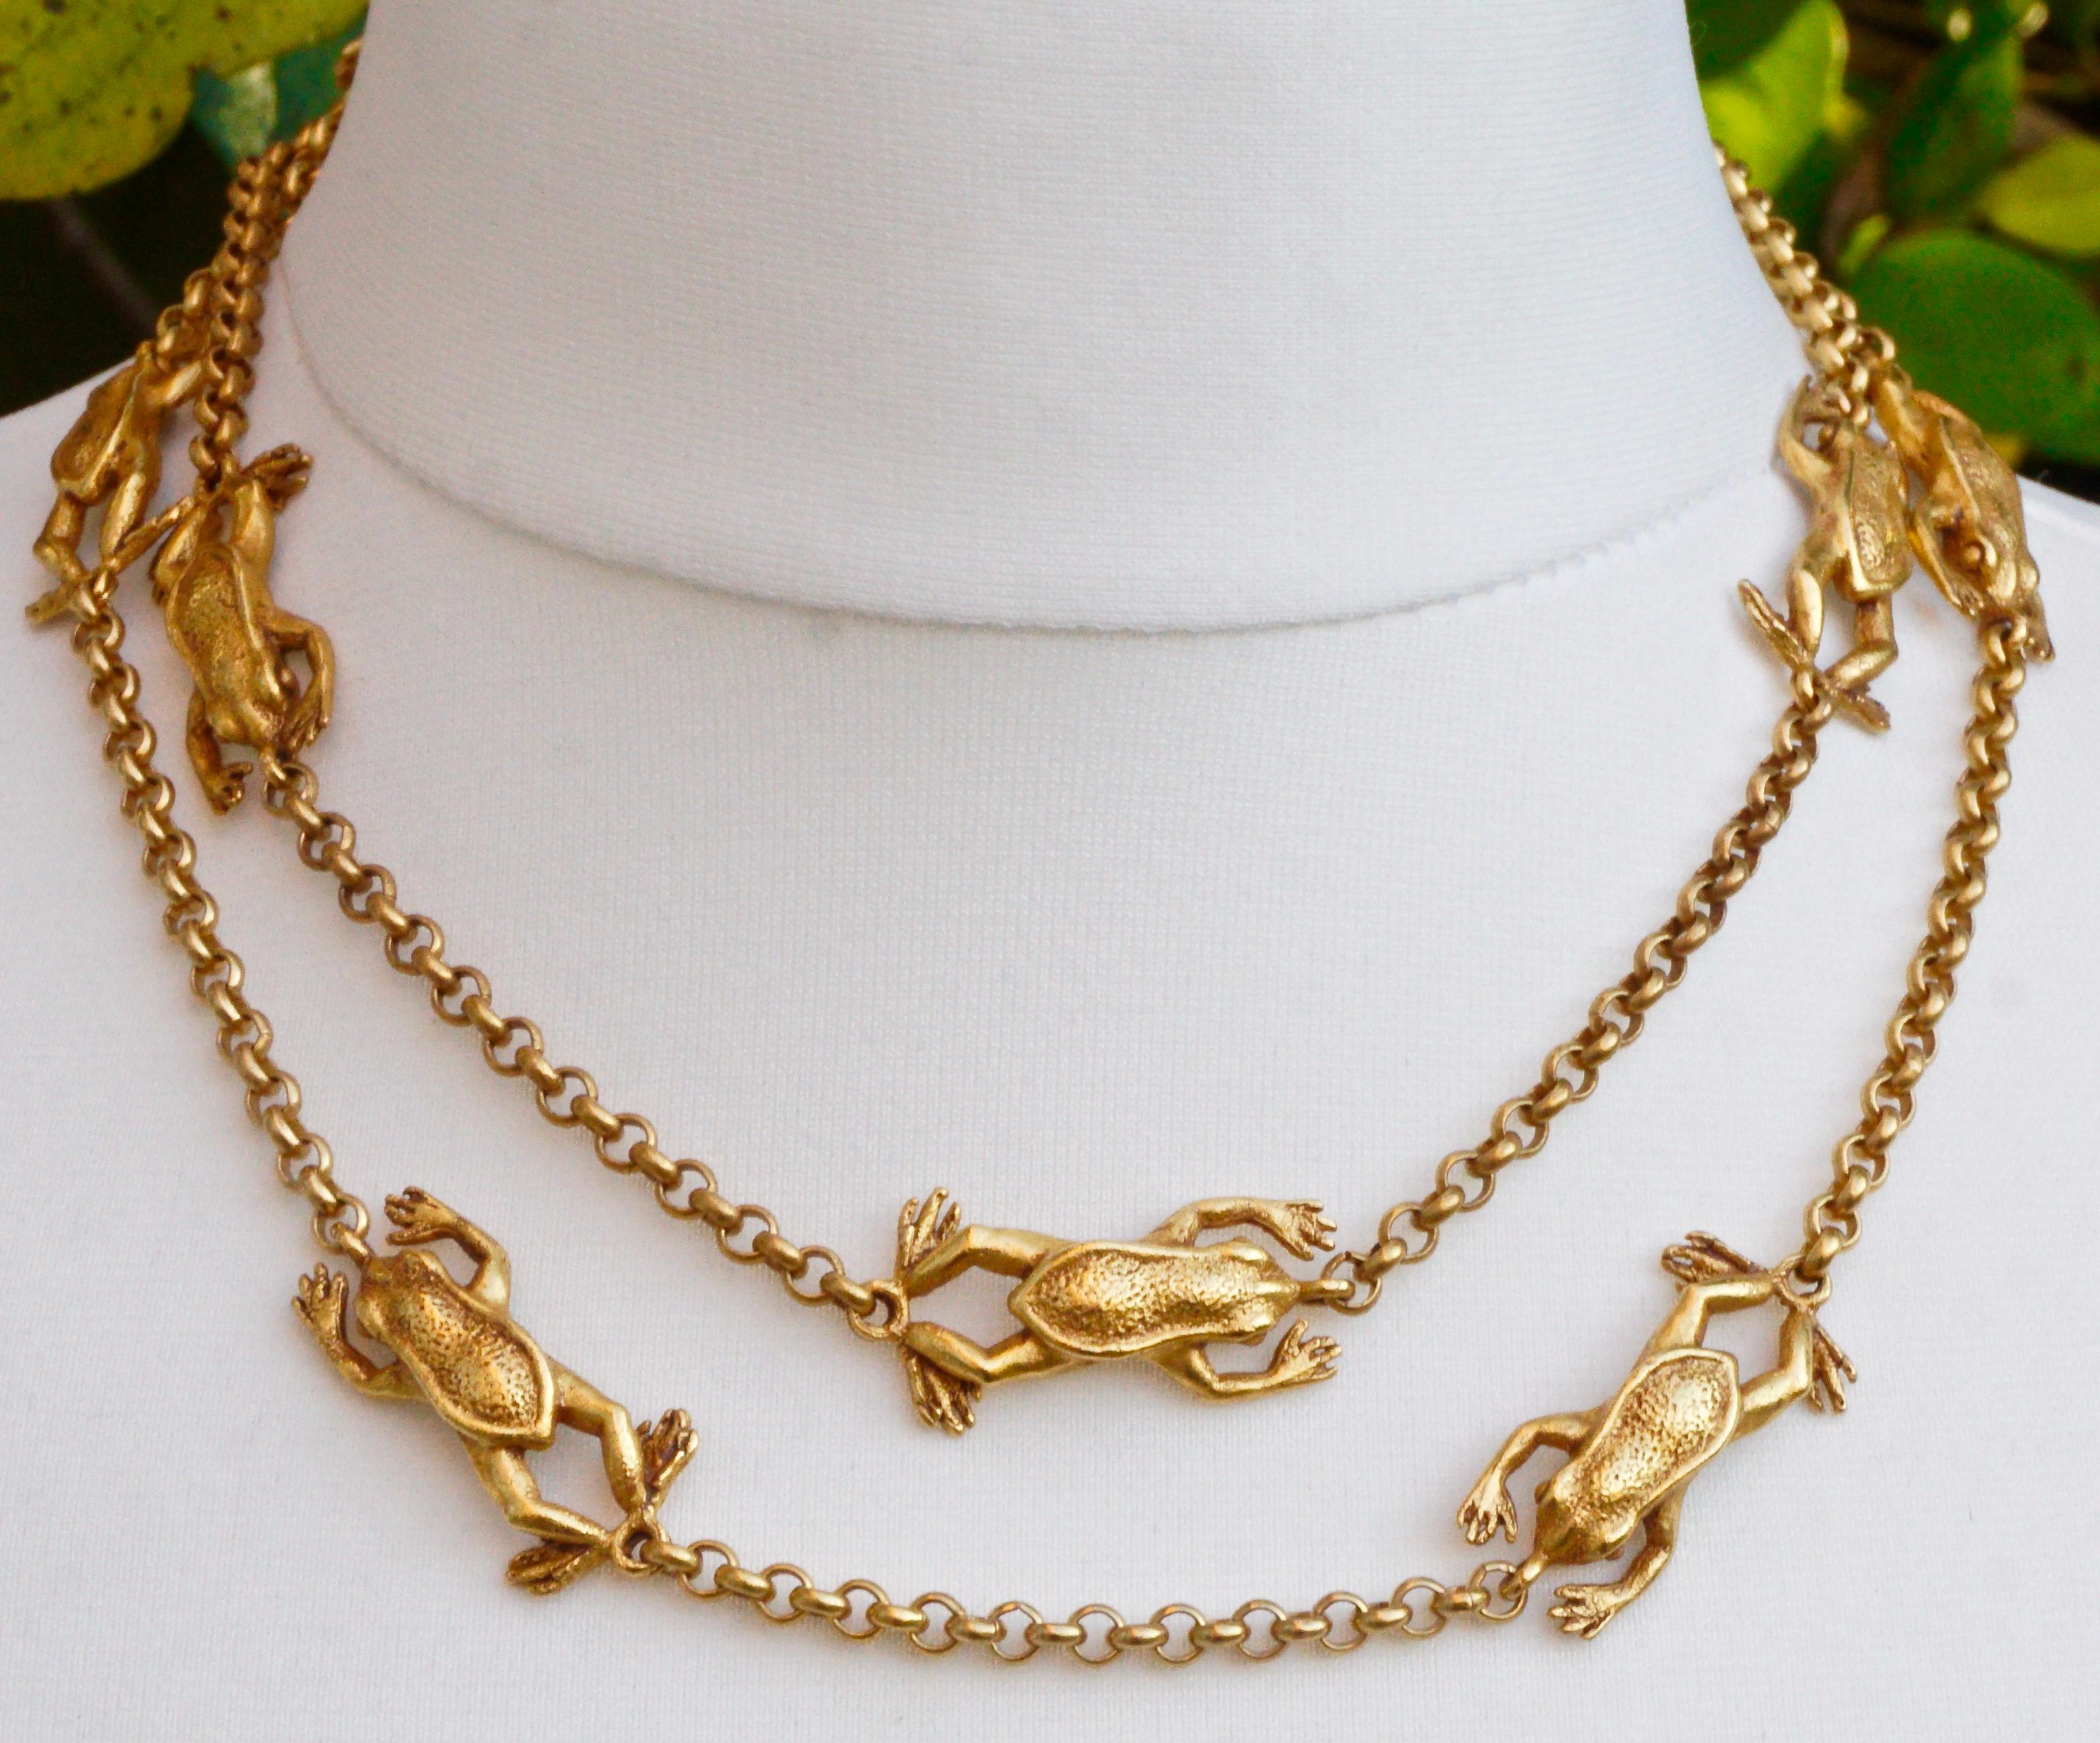 Askew London Long Gold Plated Frog Link Chain Necklace with a Flower Clasp 4